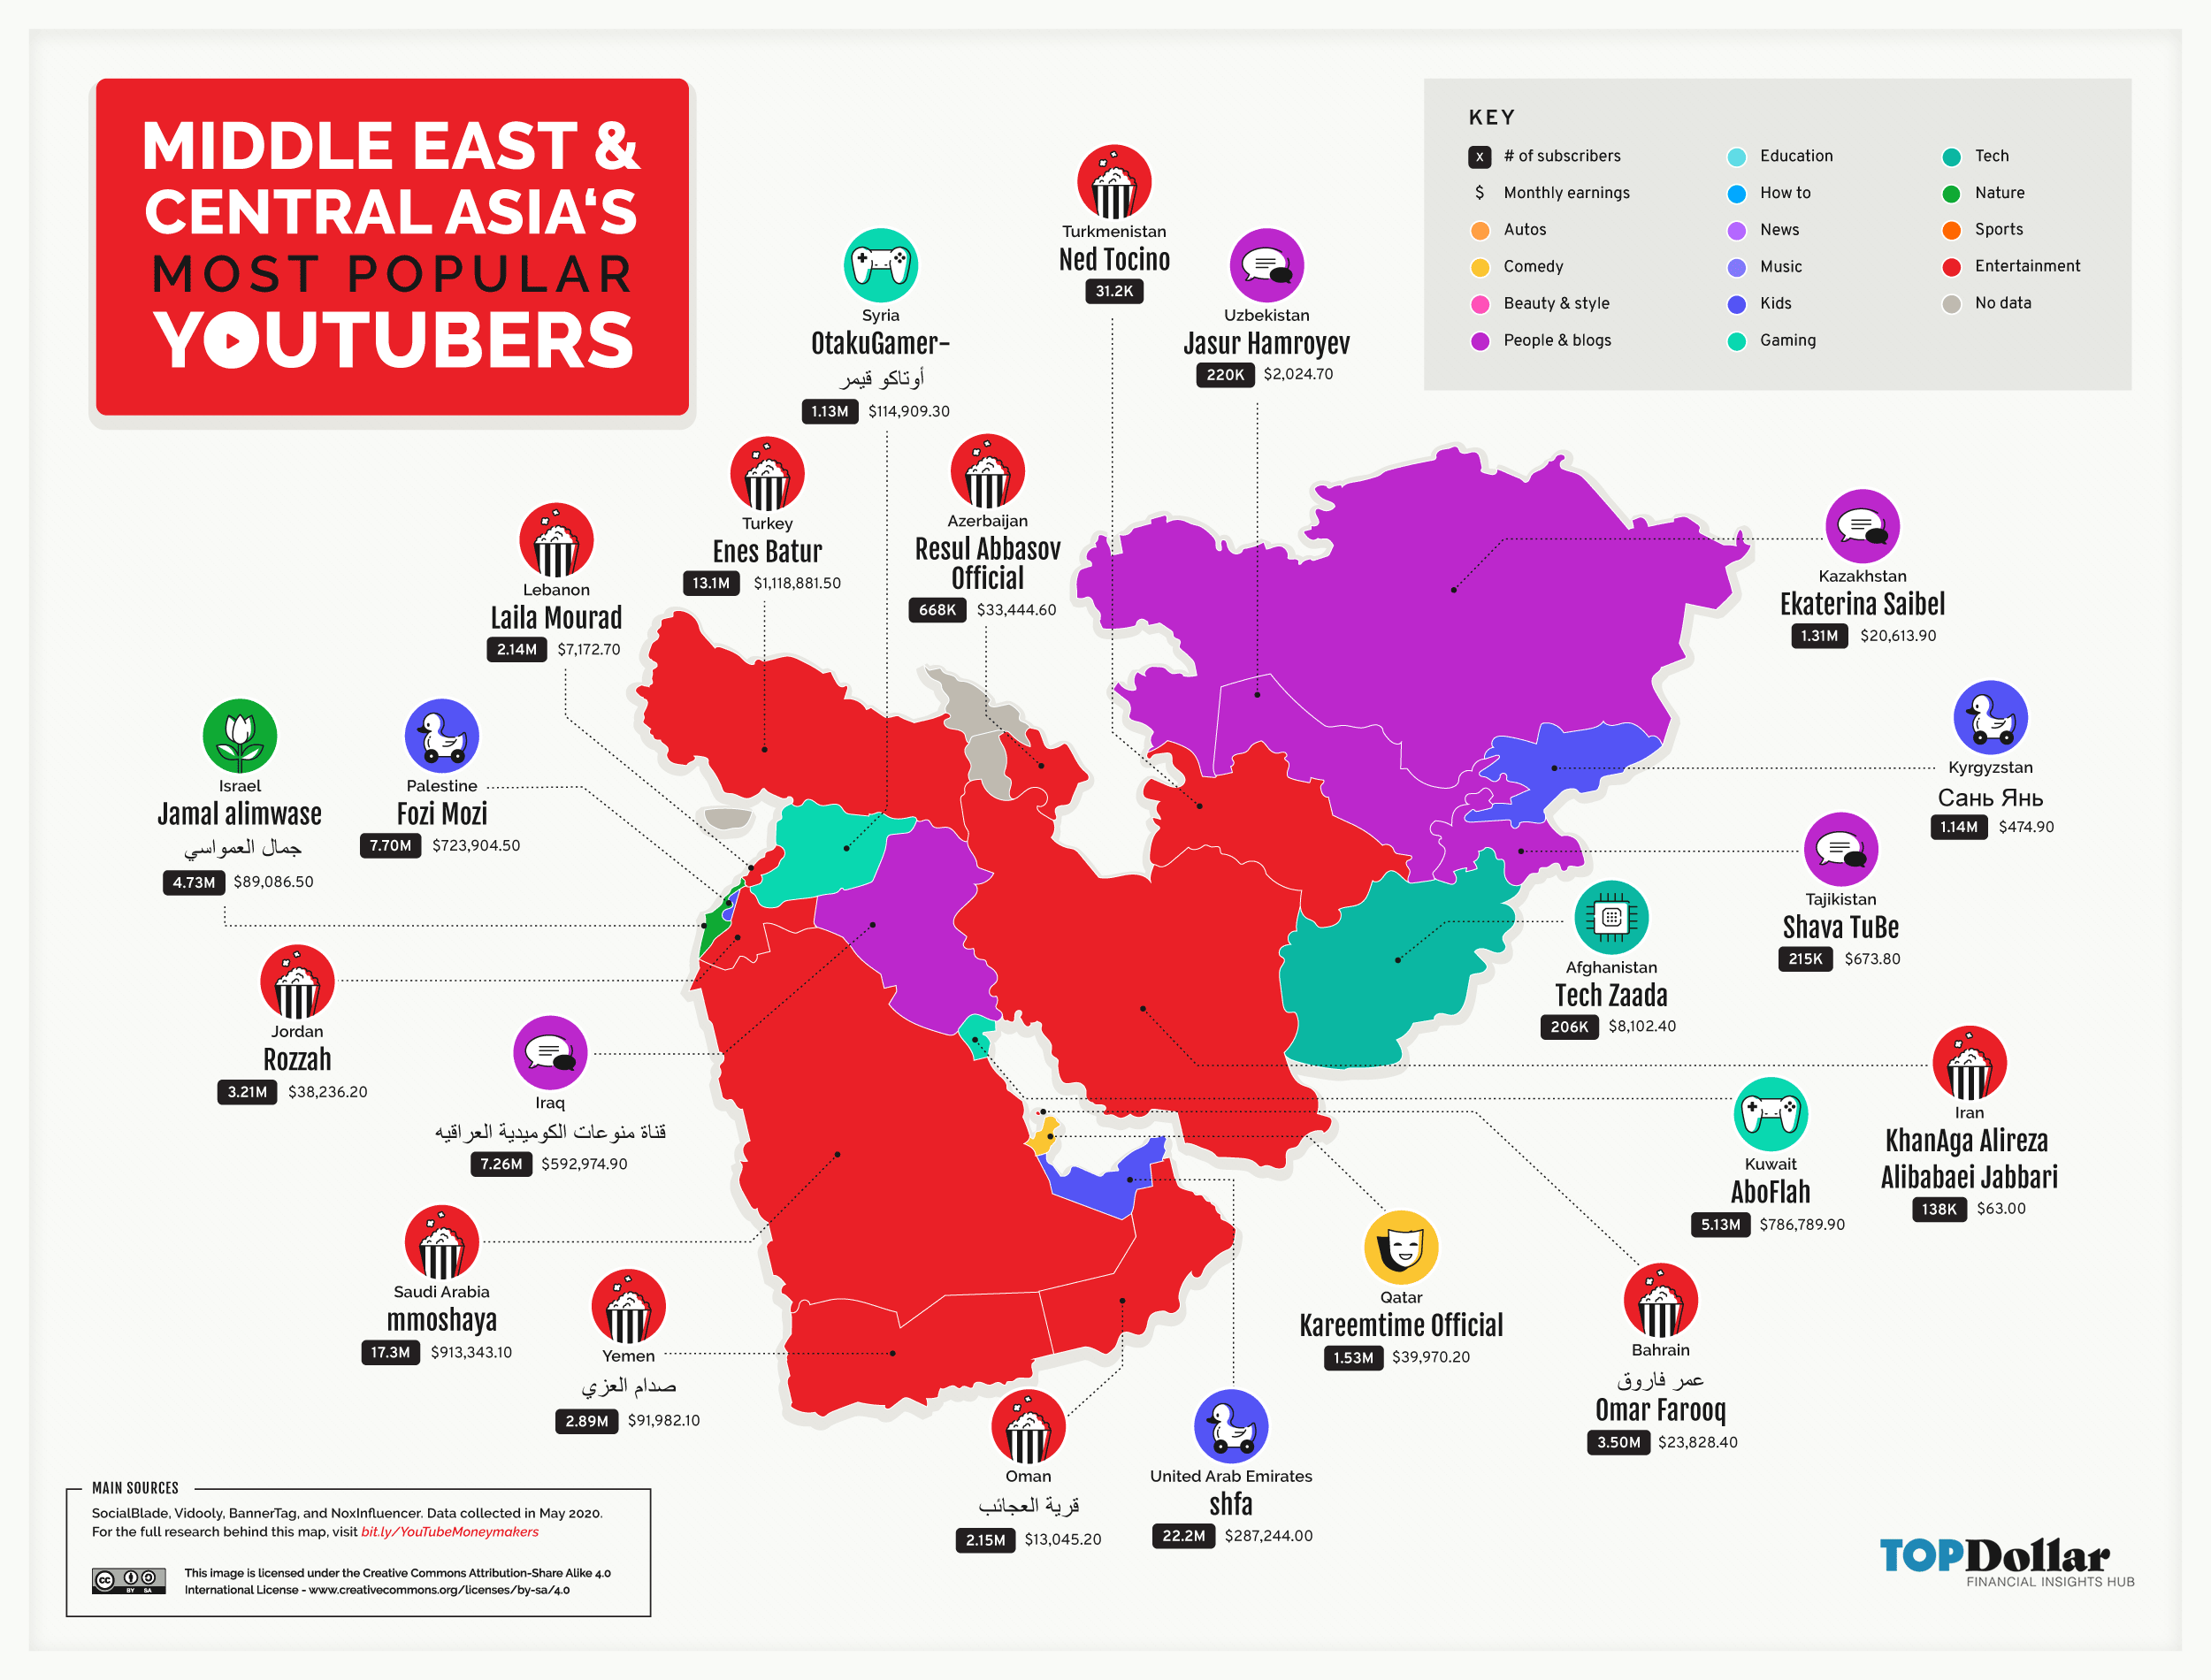 Middle East and Central Asia's Most Popular YouTubers